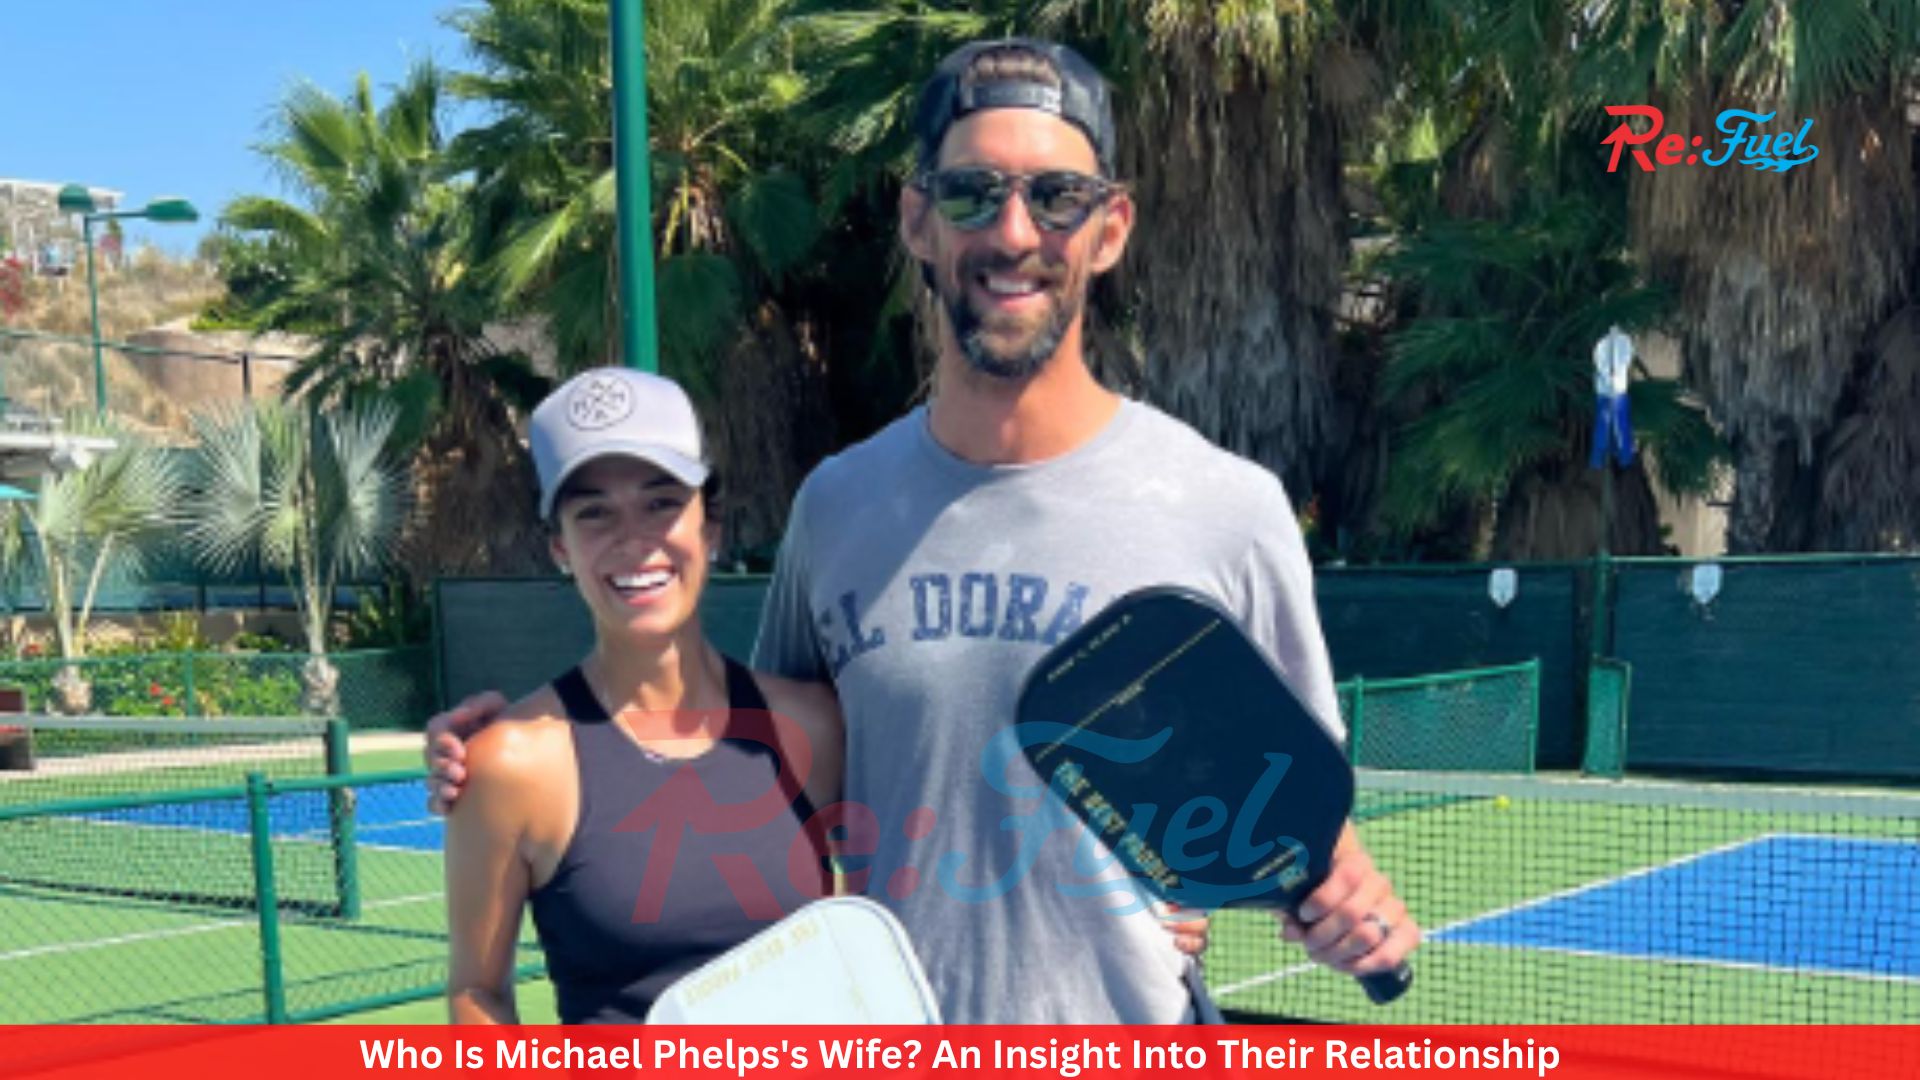 Who Is Michael Phelps's Wife? An Insight Into Their Relationship